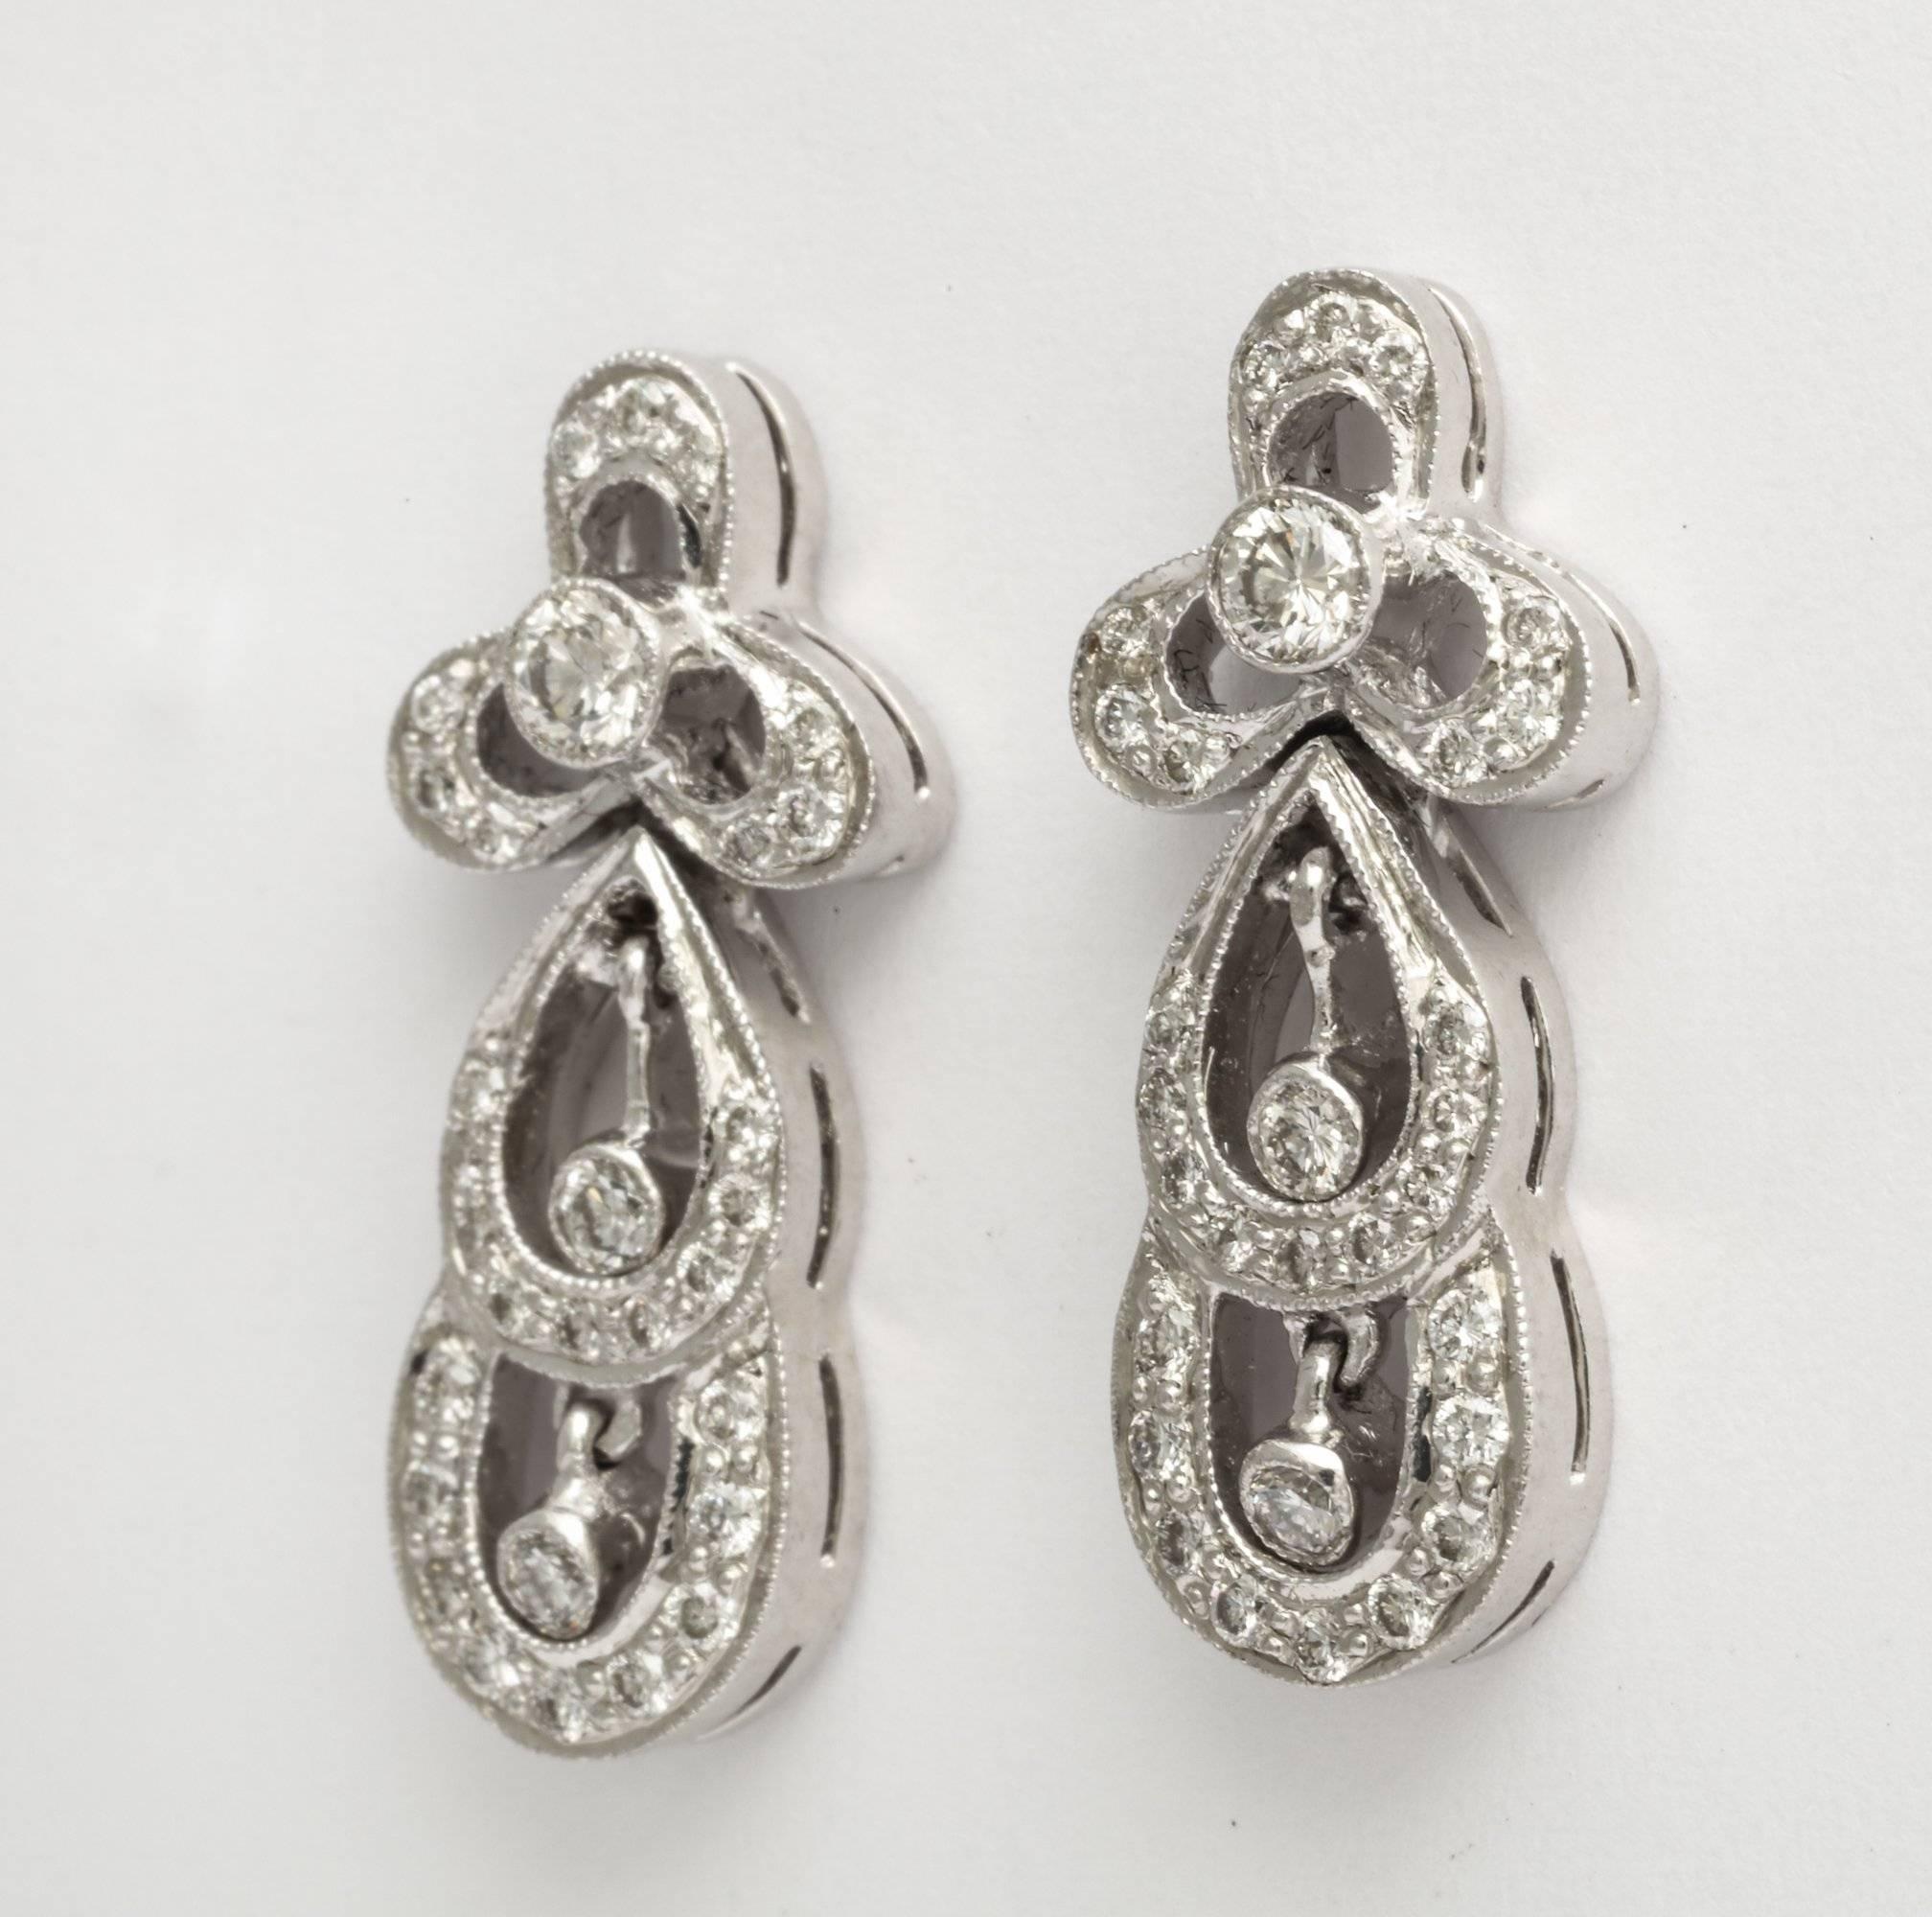 A delicate pair of French Deco diamond drop earrings set in platinum with two small dangling diamond drops in each. French touch marks. 